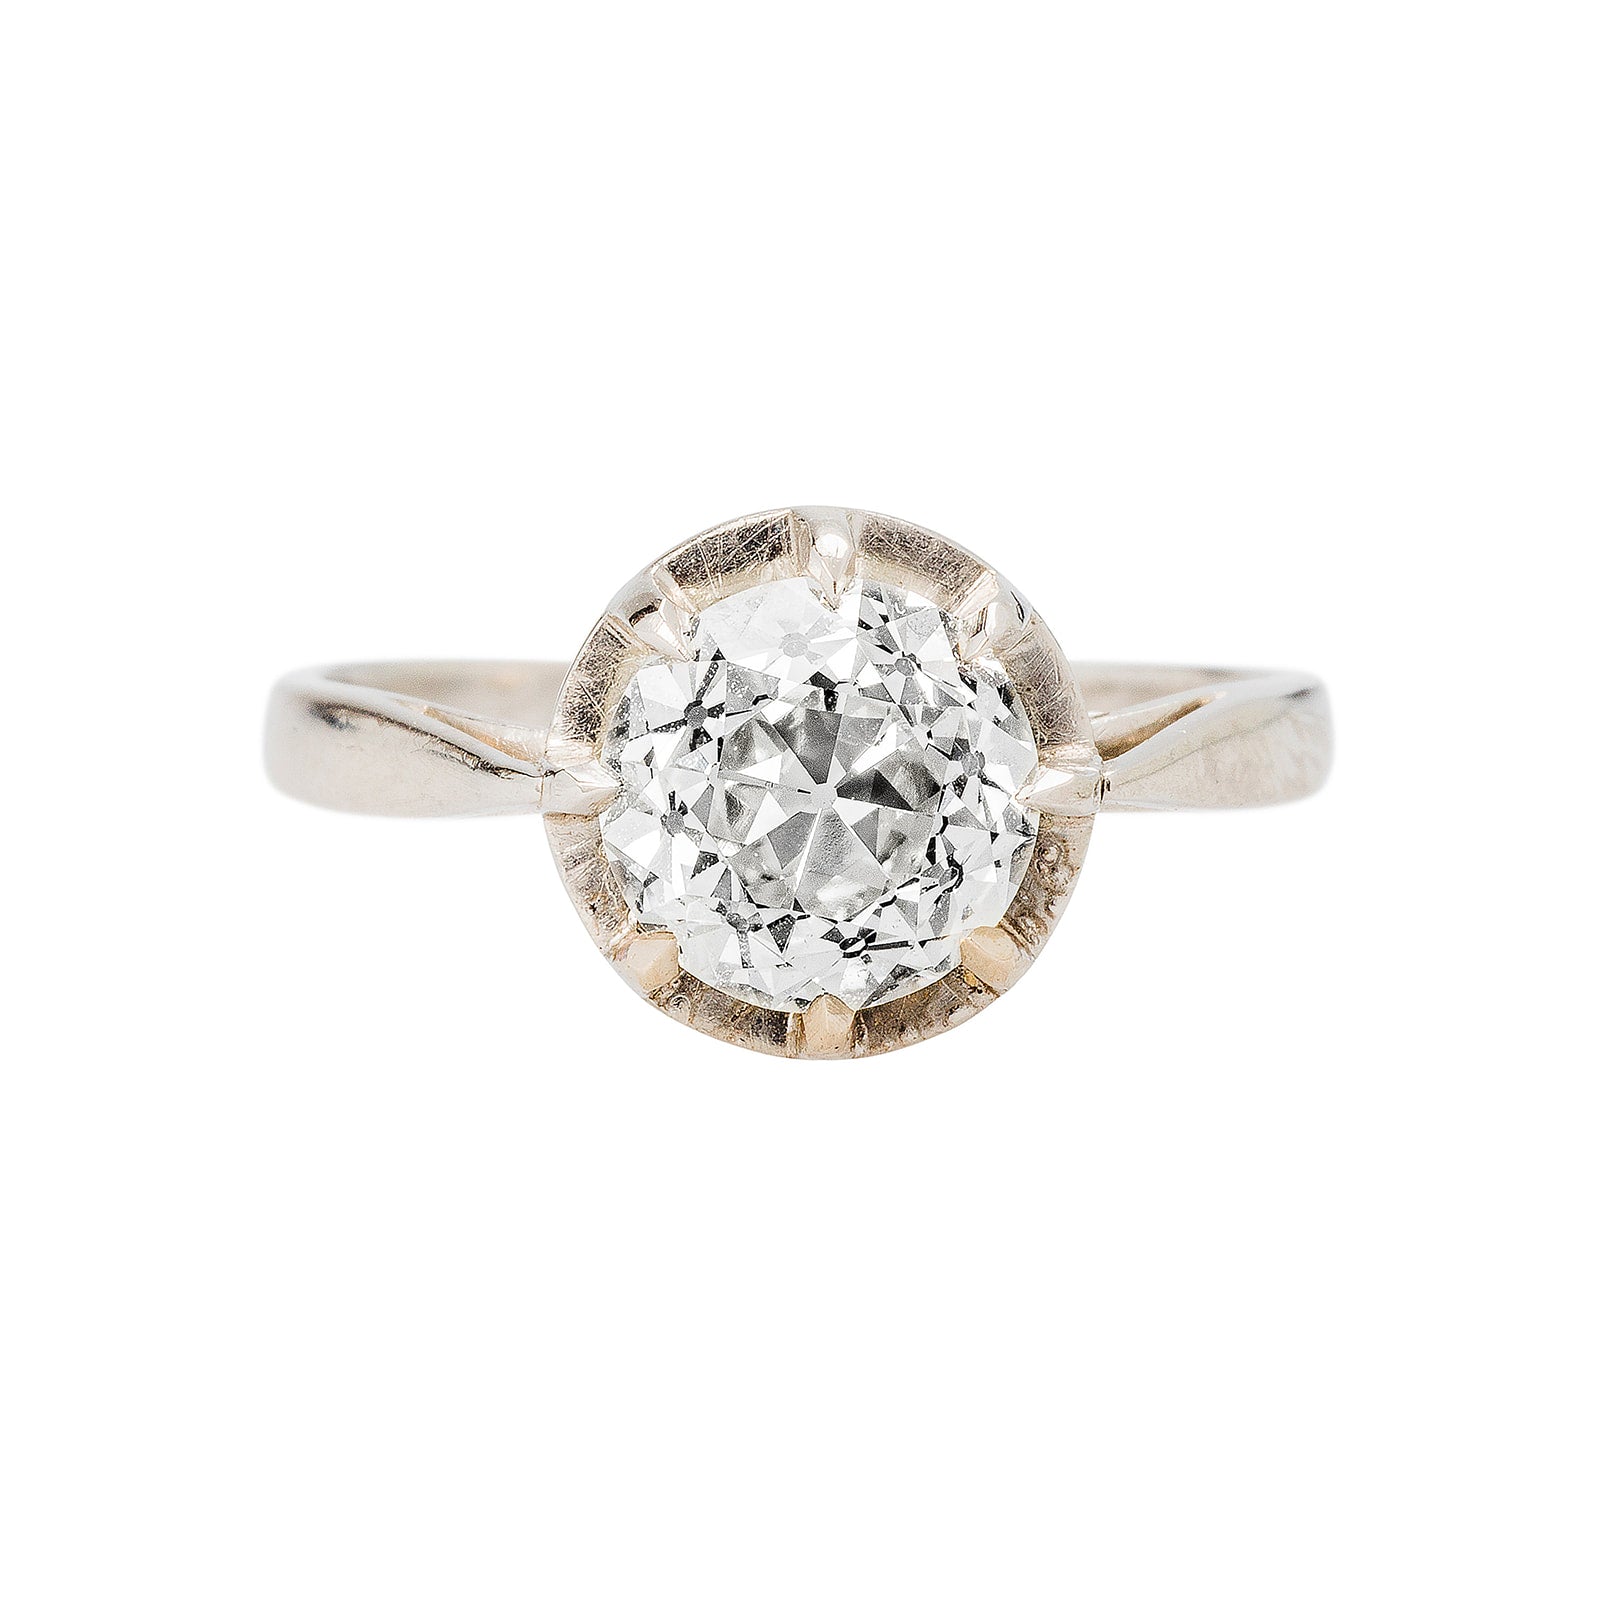 A Charming Authentic Edwardian Era Solitaire Diamond Ring